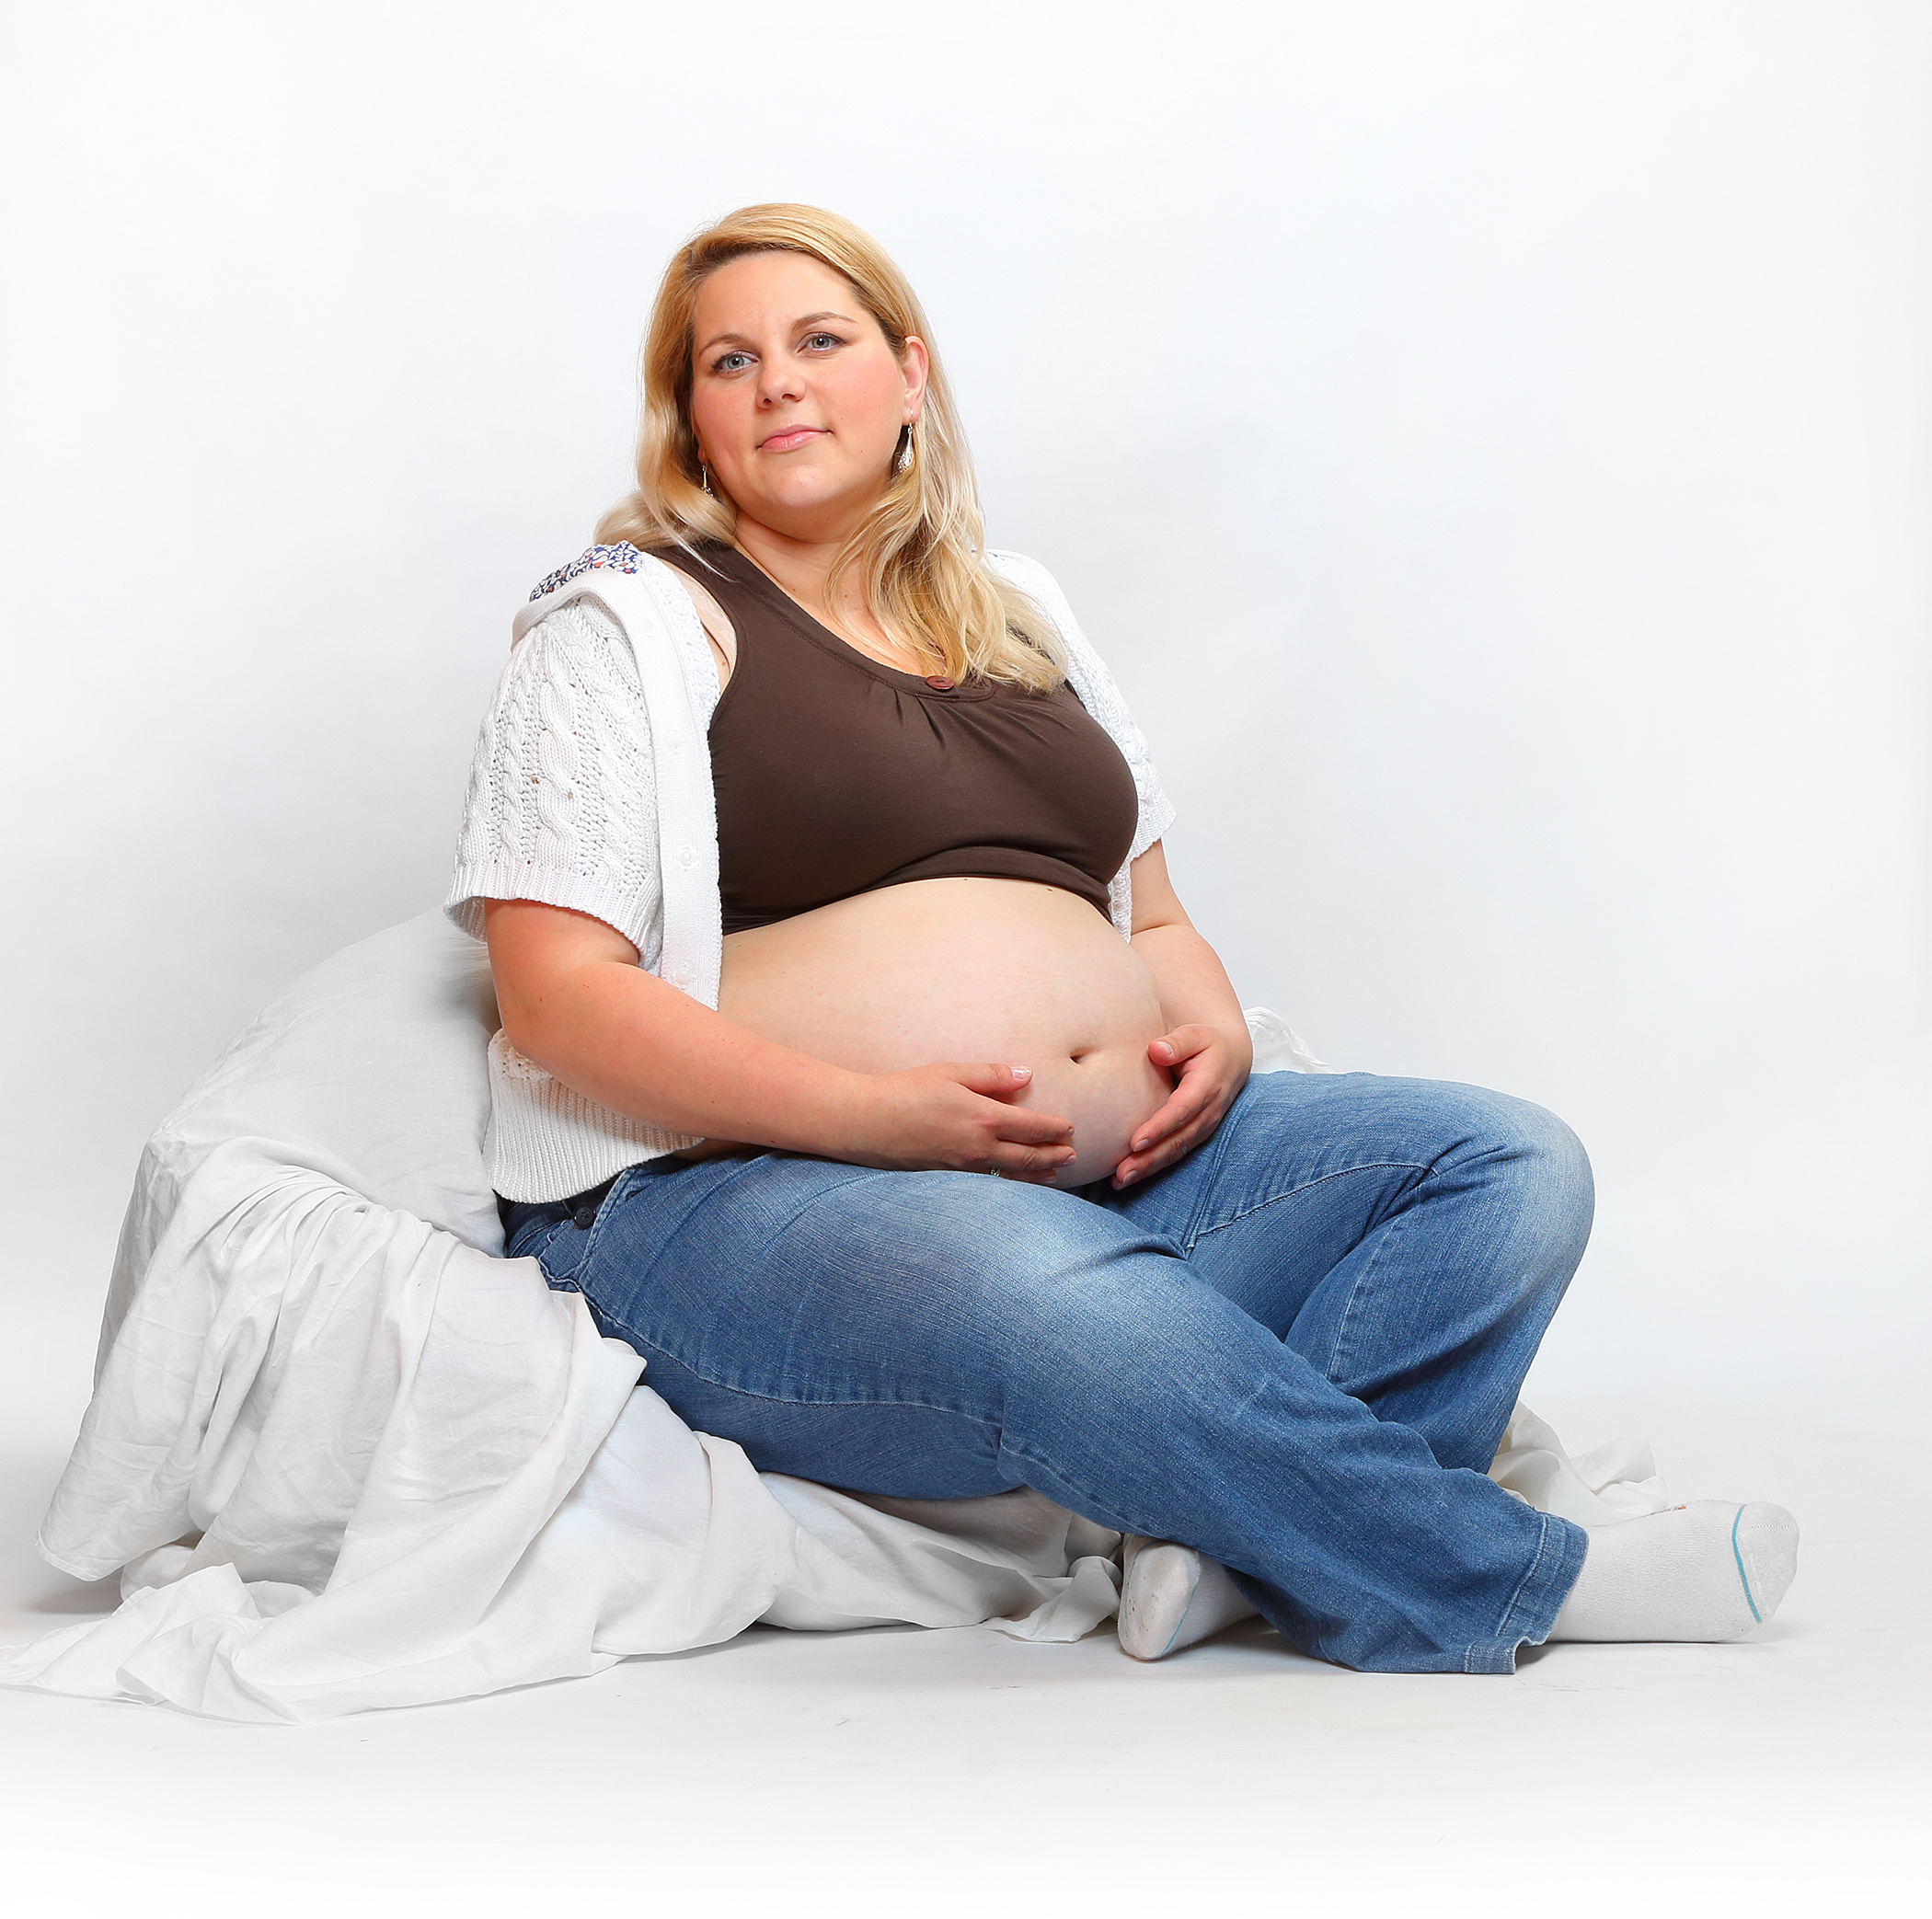 First-time Pregnant and Overweight?